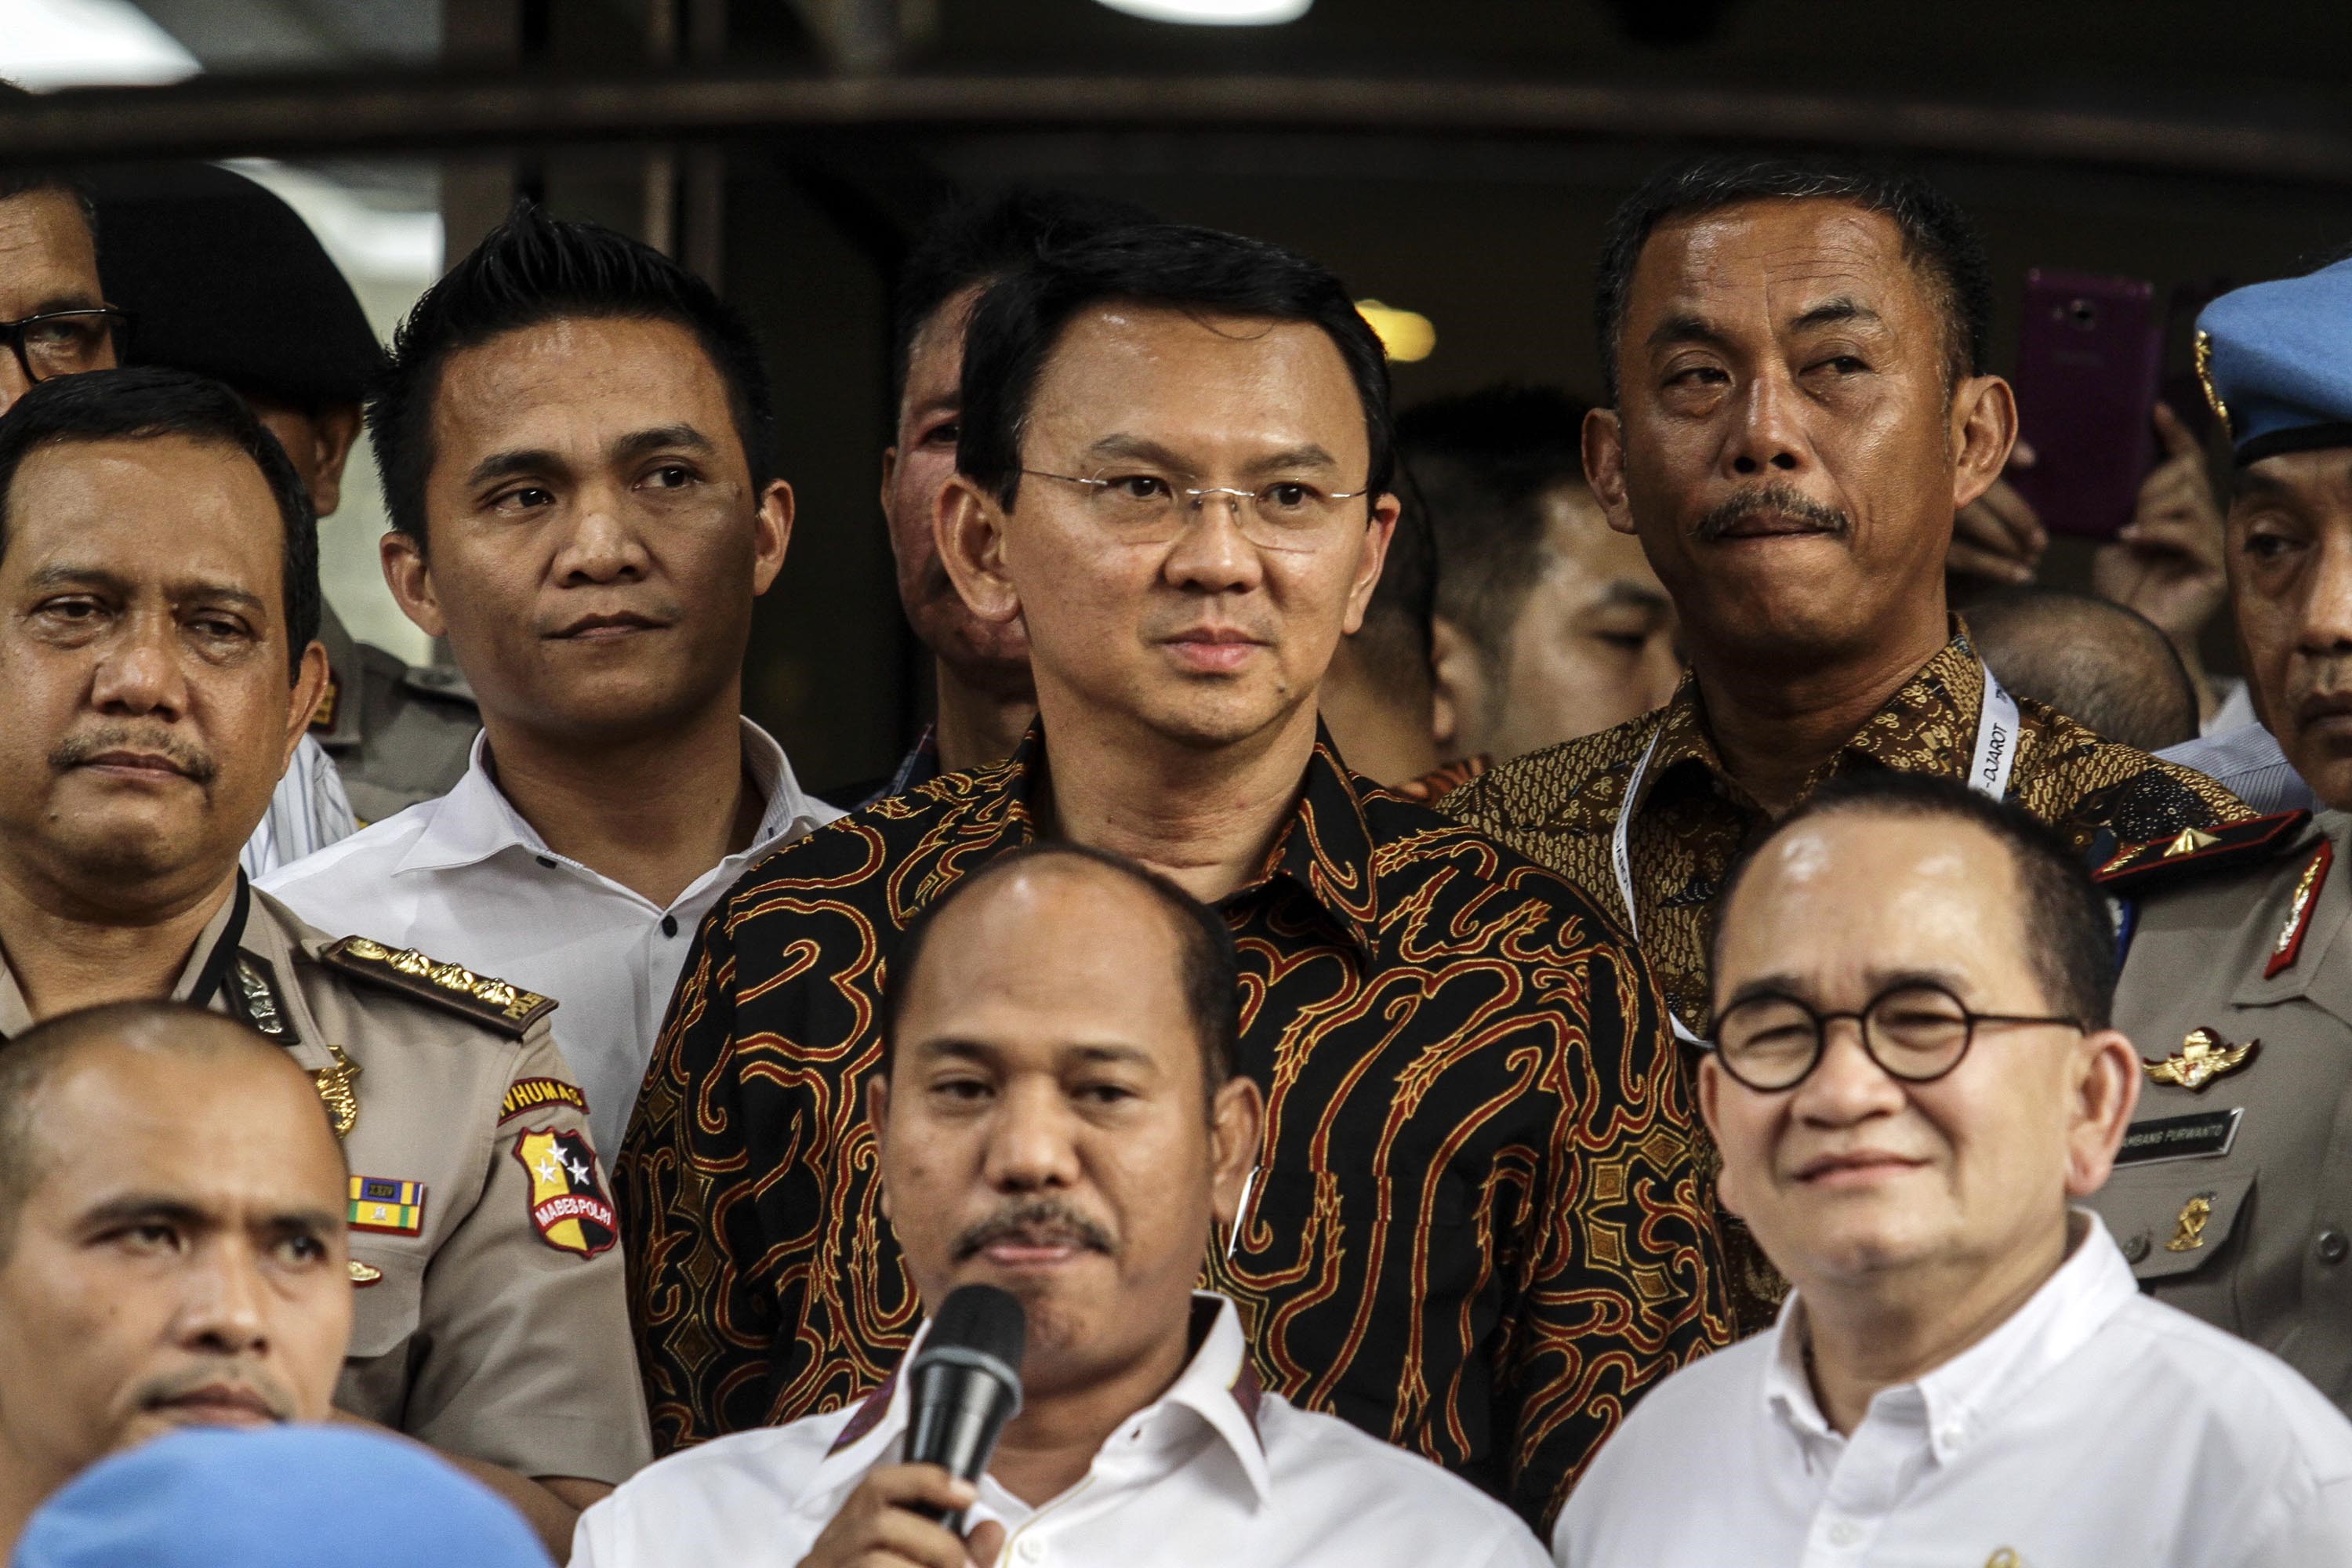 Jakarta's Governor Basuki Tjahaja Purnama, center, in a batik shirt, faces journalists after investigation by the police at the police headquarters in Jakarta on Nov. 7, 2016 (Wawan Kurniawan/Anadolu Agency/Getty Images)